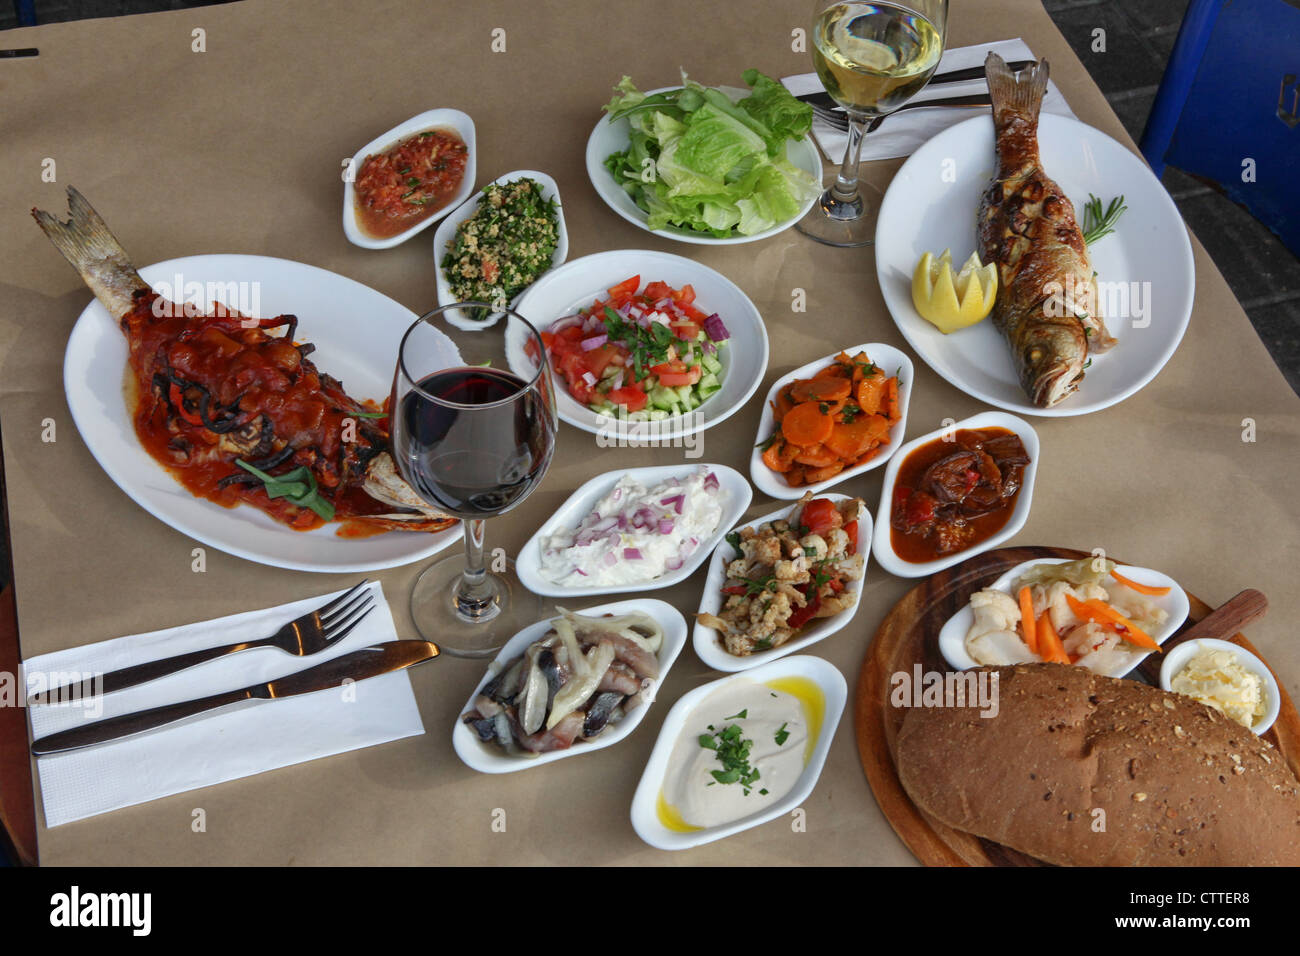 Deep fried fish and a mezze of Mediterranean Salads Stock Photo